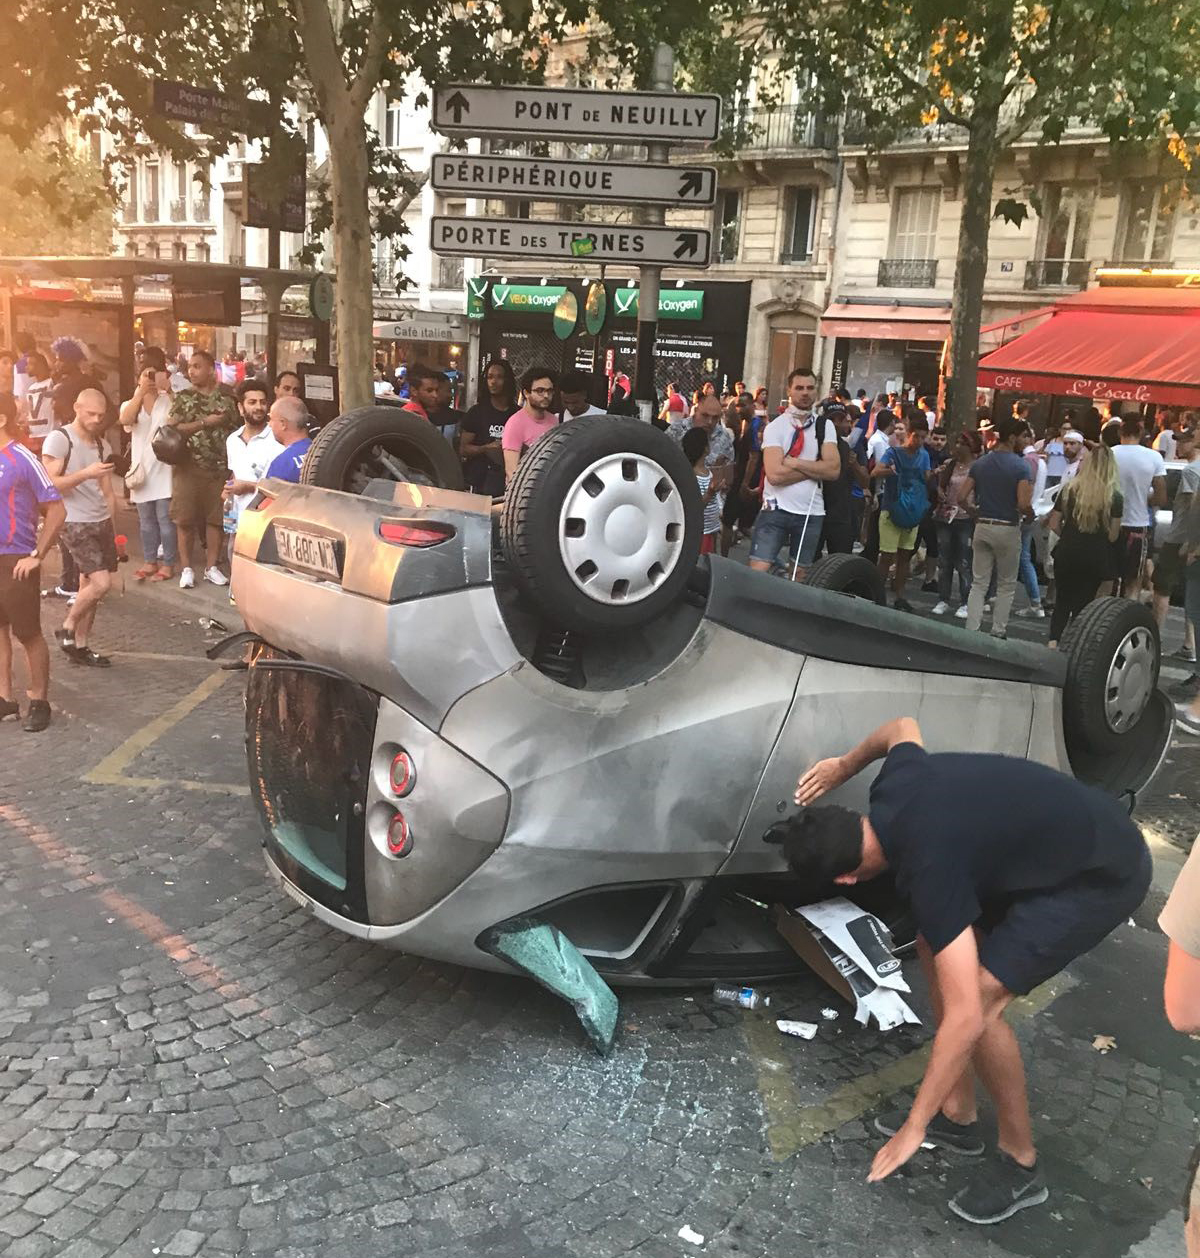 Paris witnesses riots during World Cup victory's celebrations